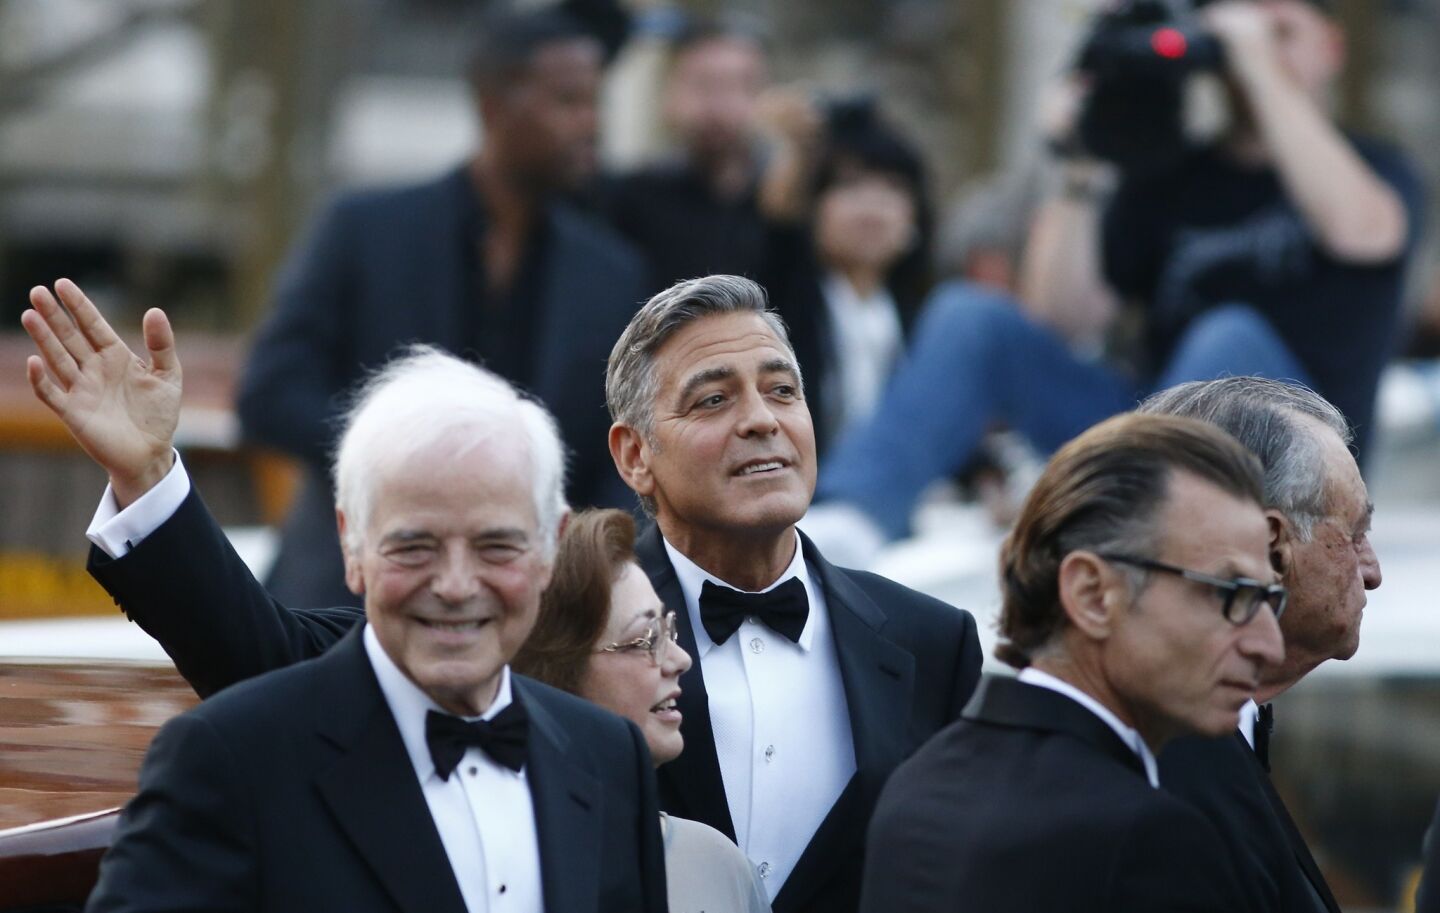 George Clooney and his dad Nick Clooney, left, arrive at the hotel where the Oscar winner's wedding to Amal Alamuddin will be held.